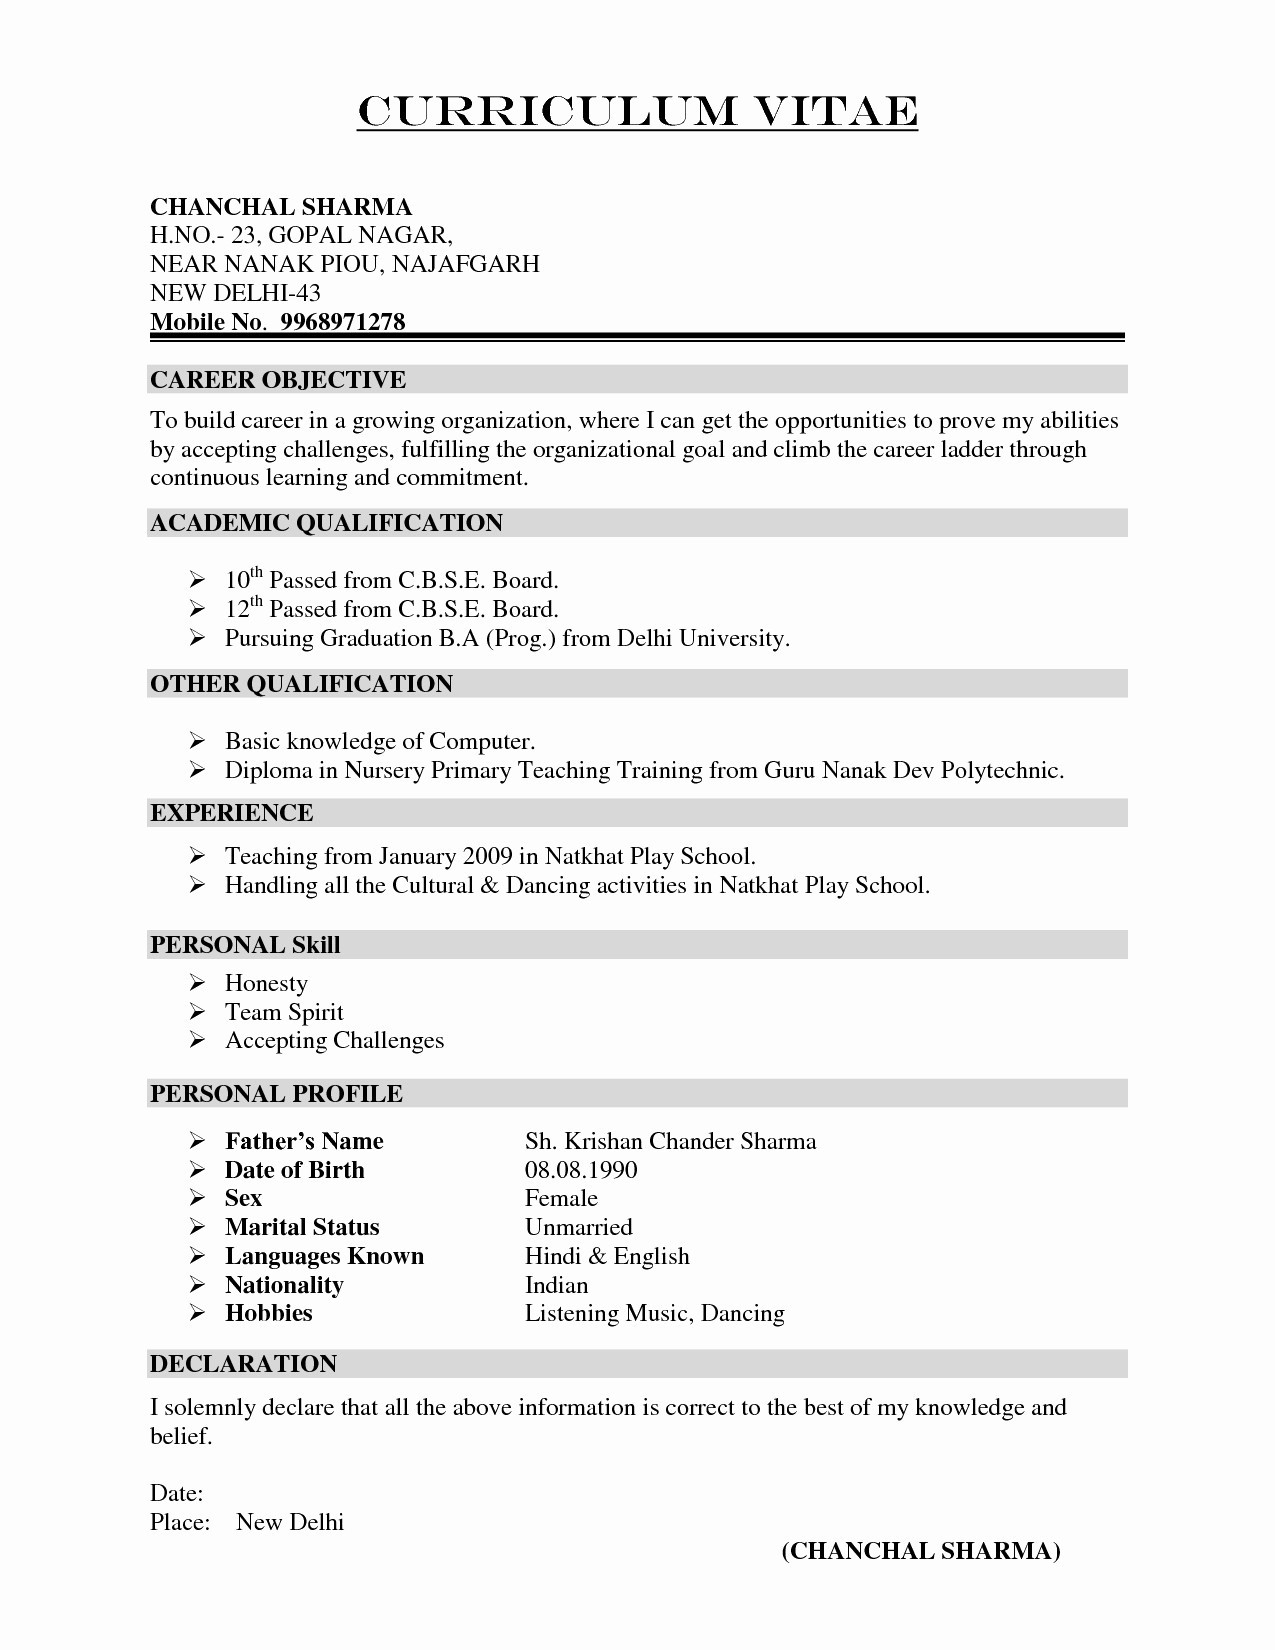 employment verification letter free template example-Sample Job Verification Letter Inspirationa New Resume Cover Letter Formatted Resume 0d Email Resume Cover 5-i